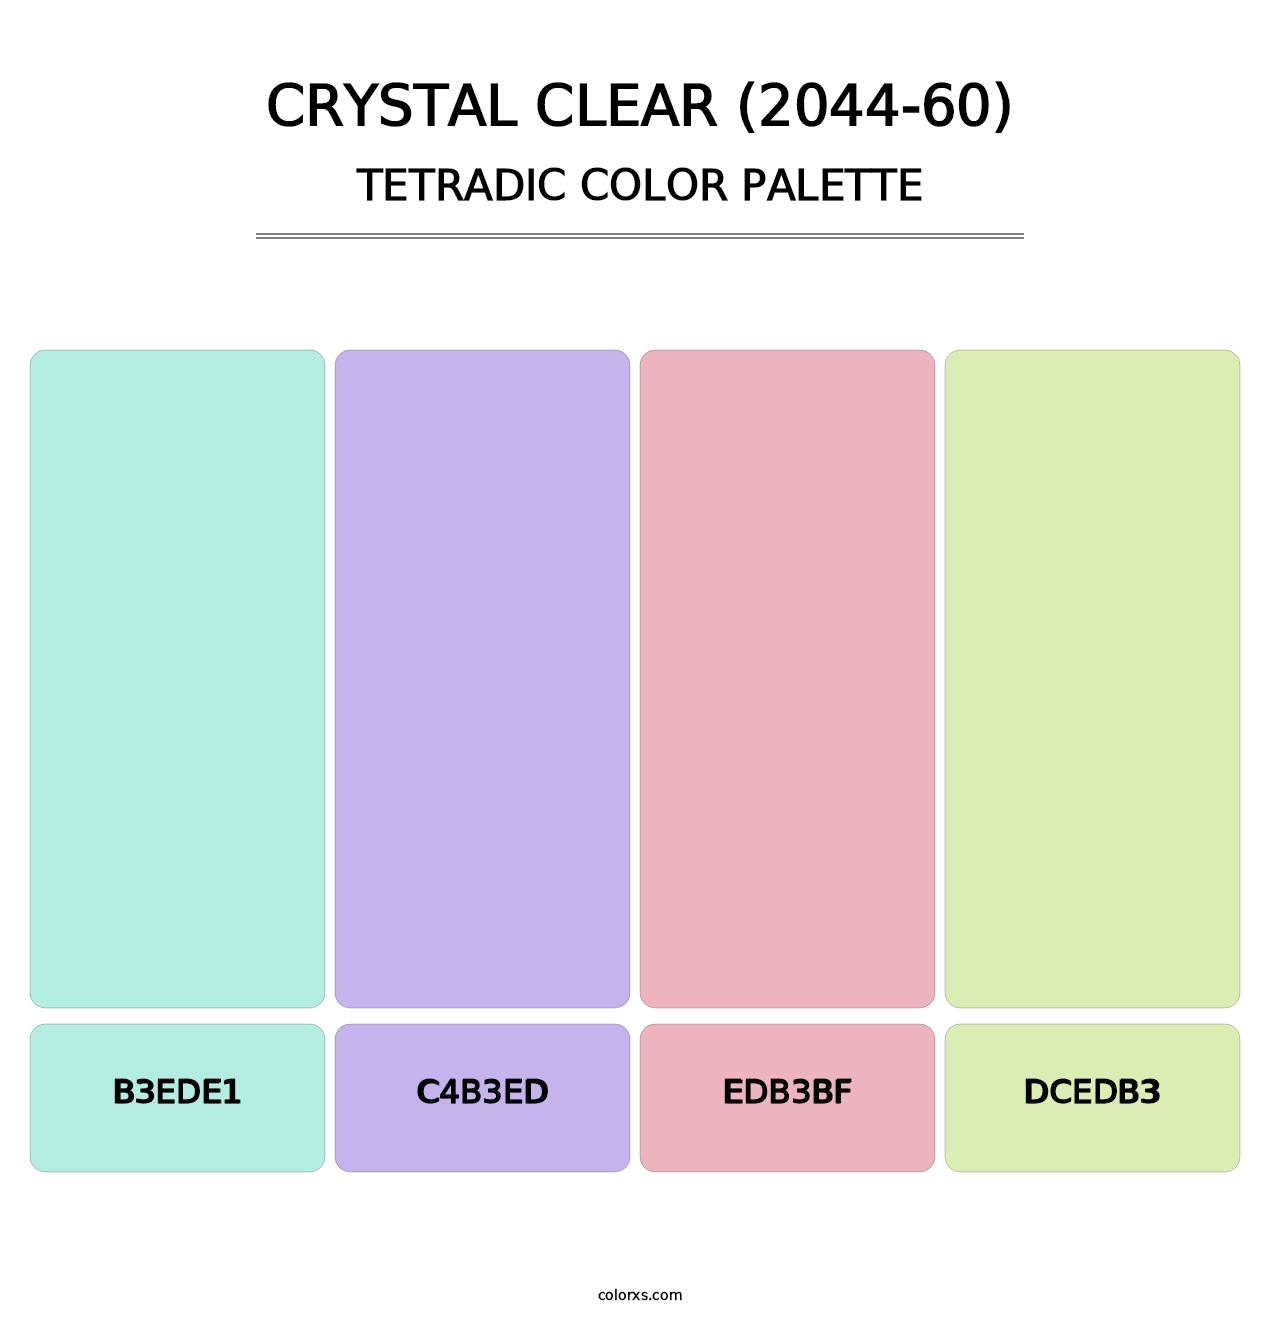 Crystal Clear (2044-60) - Tetradic Color Palette